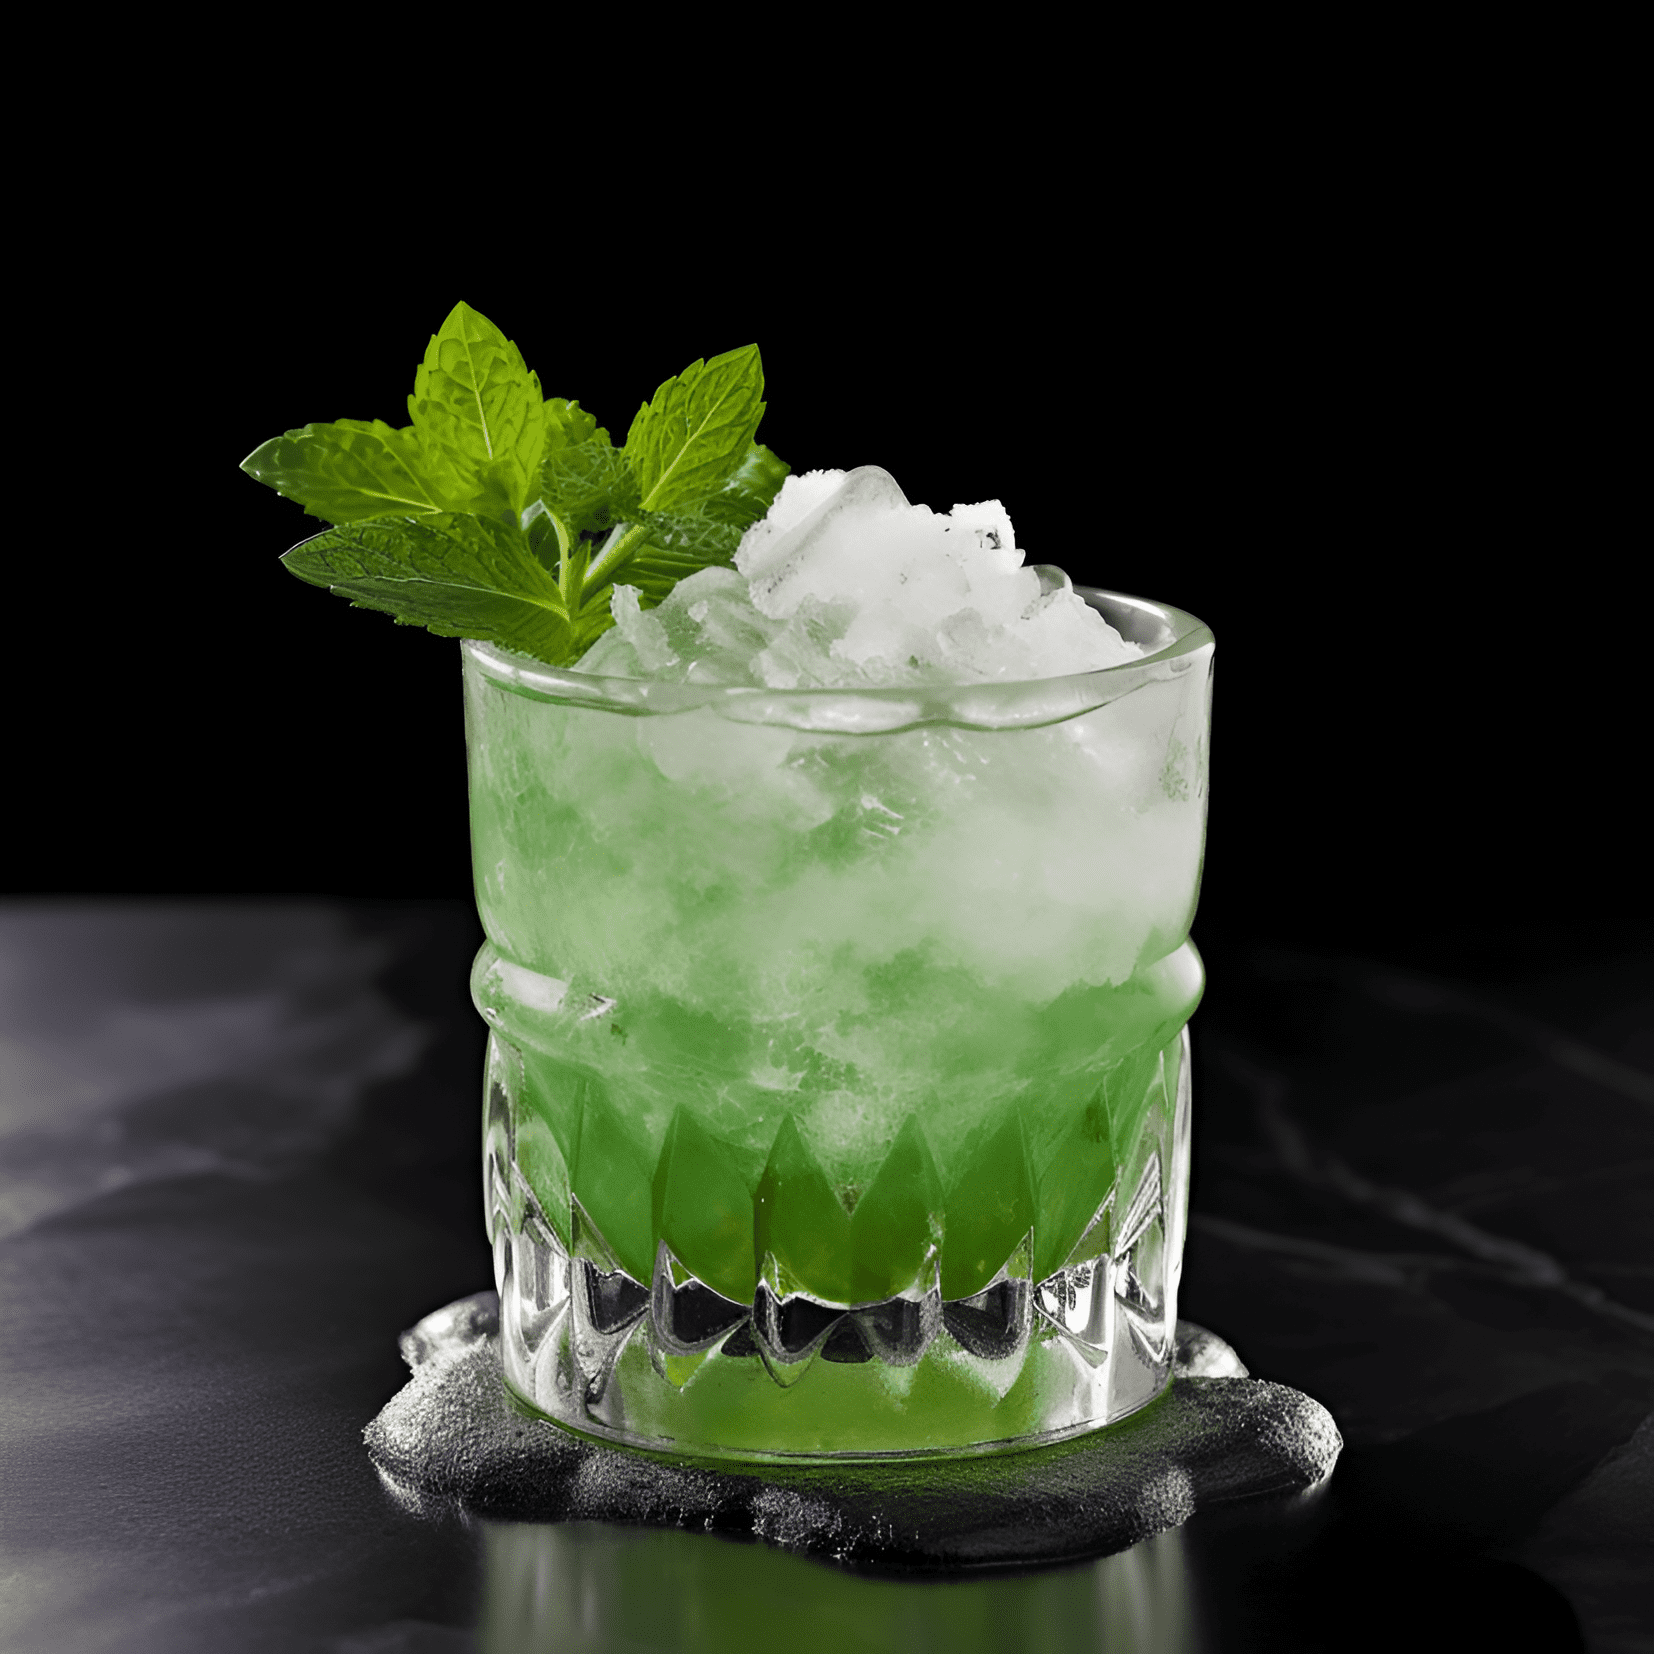 Basil Smash Cocktail Recipe - The Basil Smash is a refreshing, herbaceous, and slightly sweet cocktail with a hint of tartness from the lemon juice. The gin adds a layer of complexity with its botanical flavors, while the simple syrup balances the acidity of the lemon.